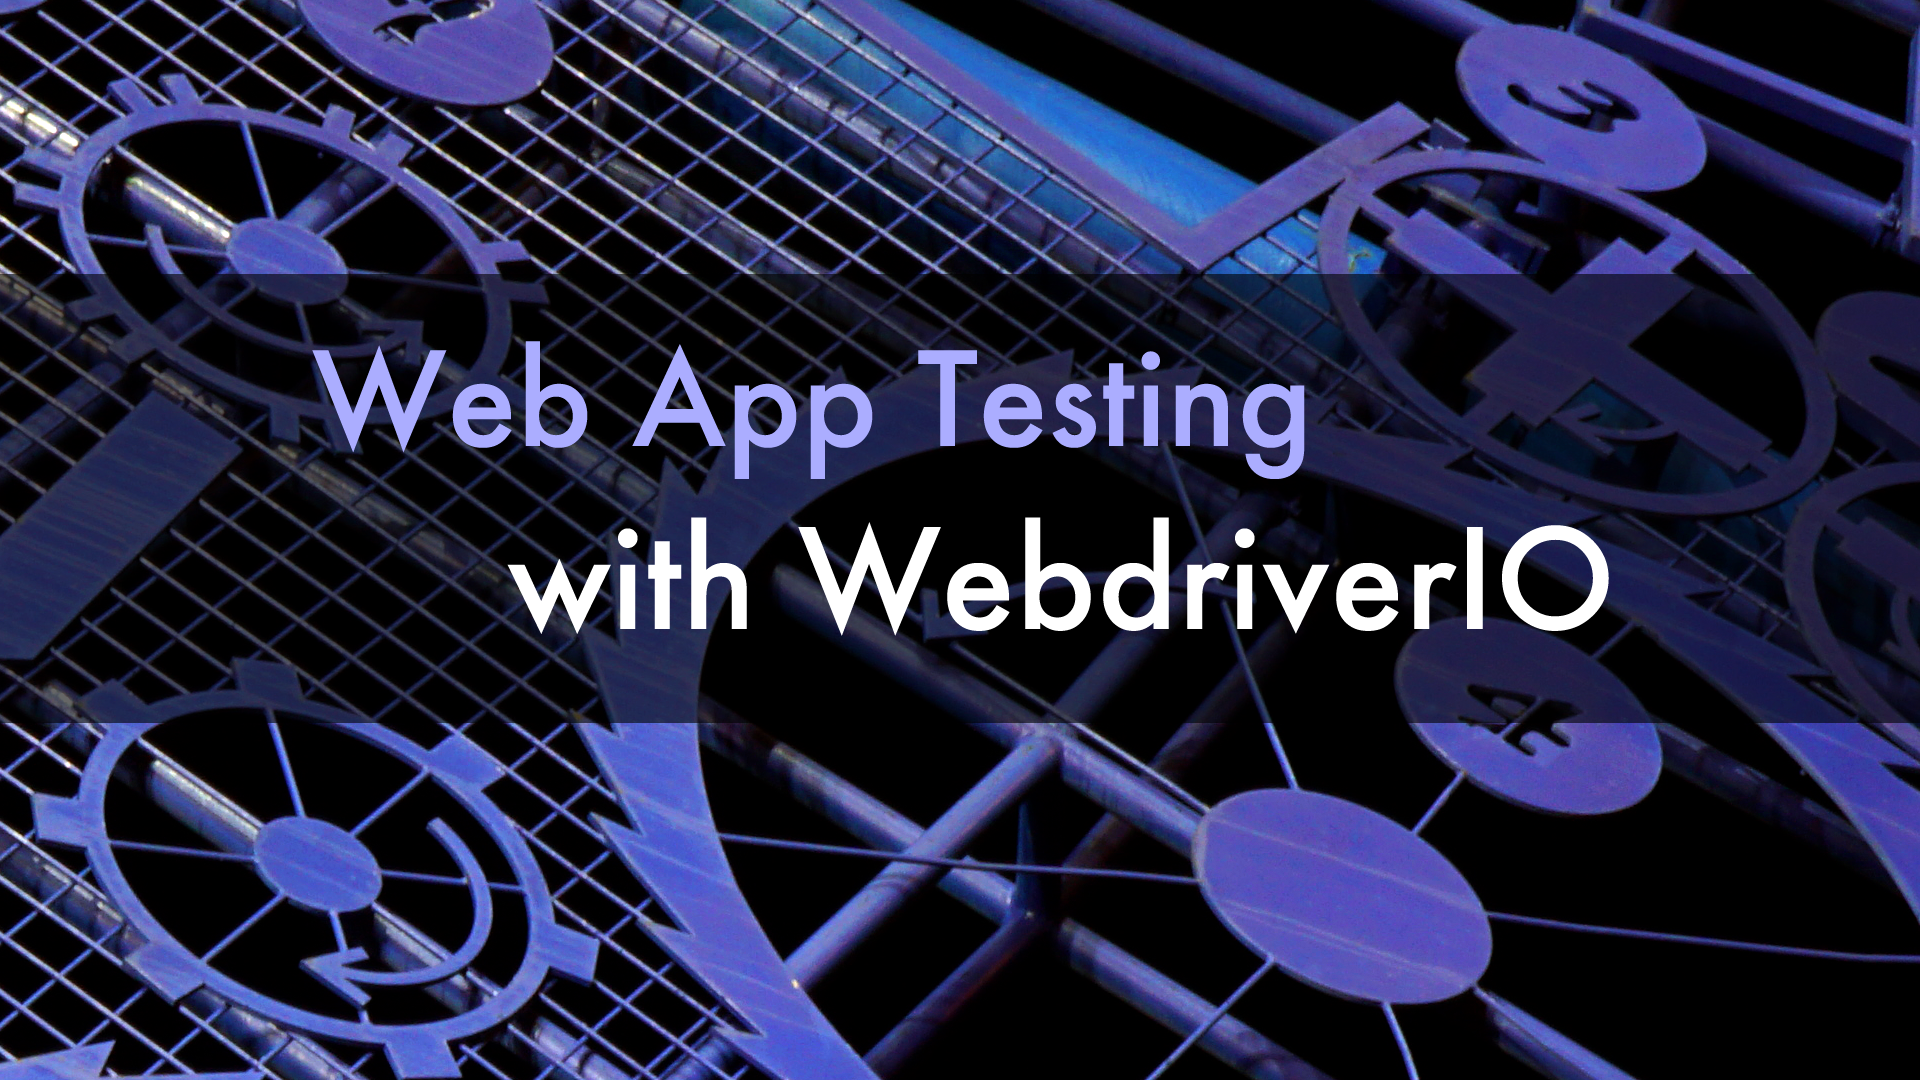 Announcing Web App Testing with WebdriverIO - My New Online Course!